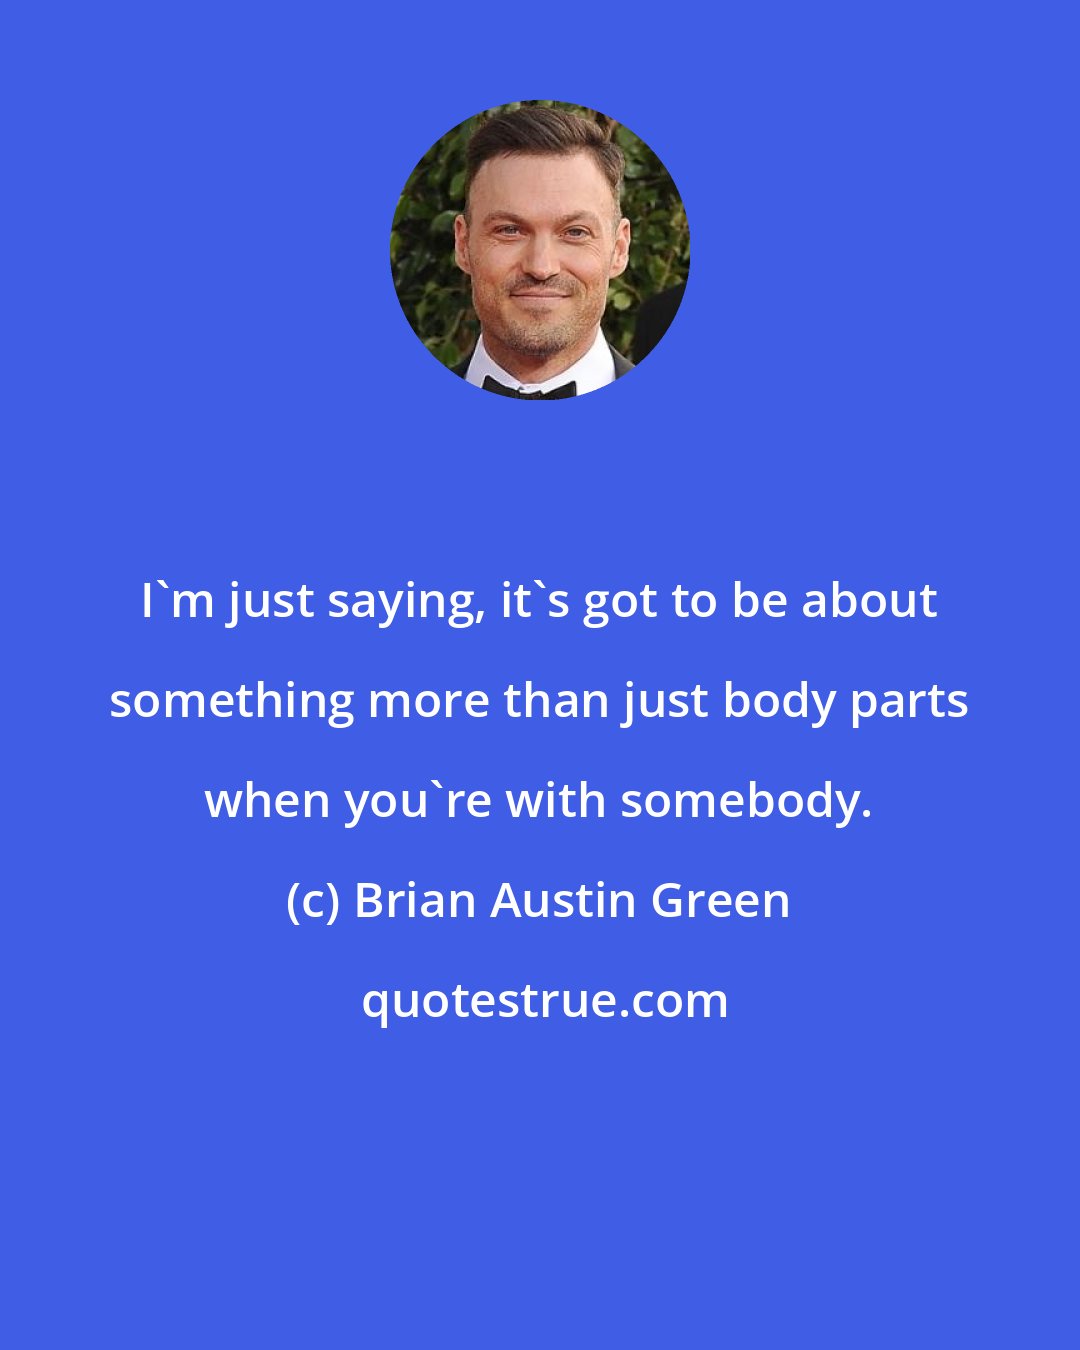 Brian Austin Green: I'm just saying, it's got to be about something more than just body parts when you're with somebody.